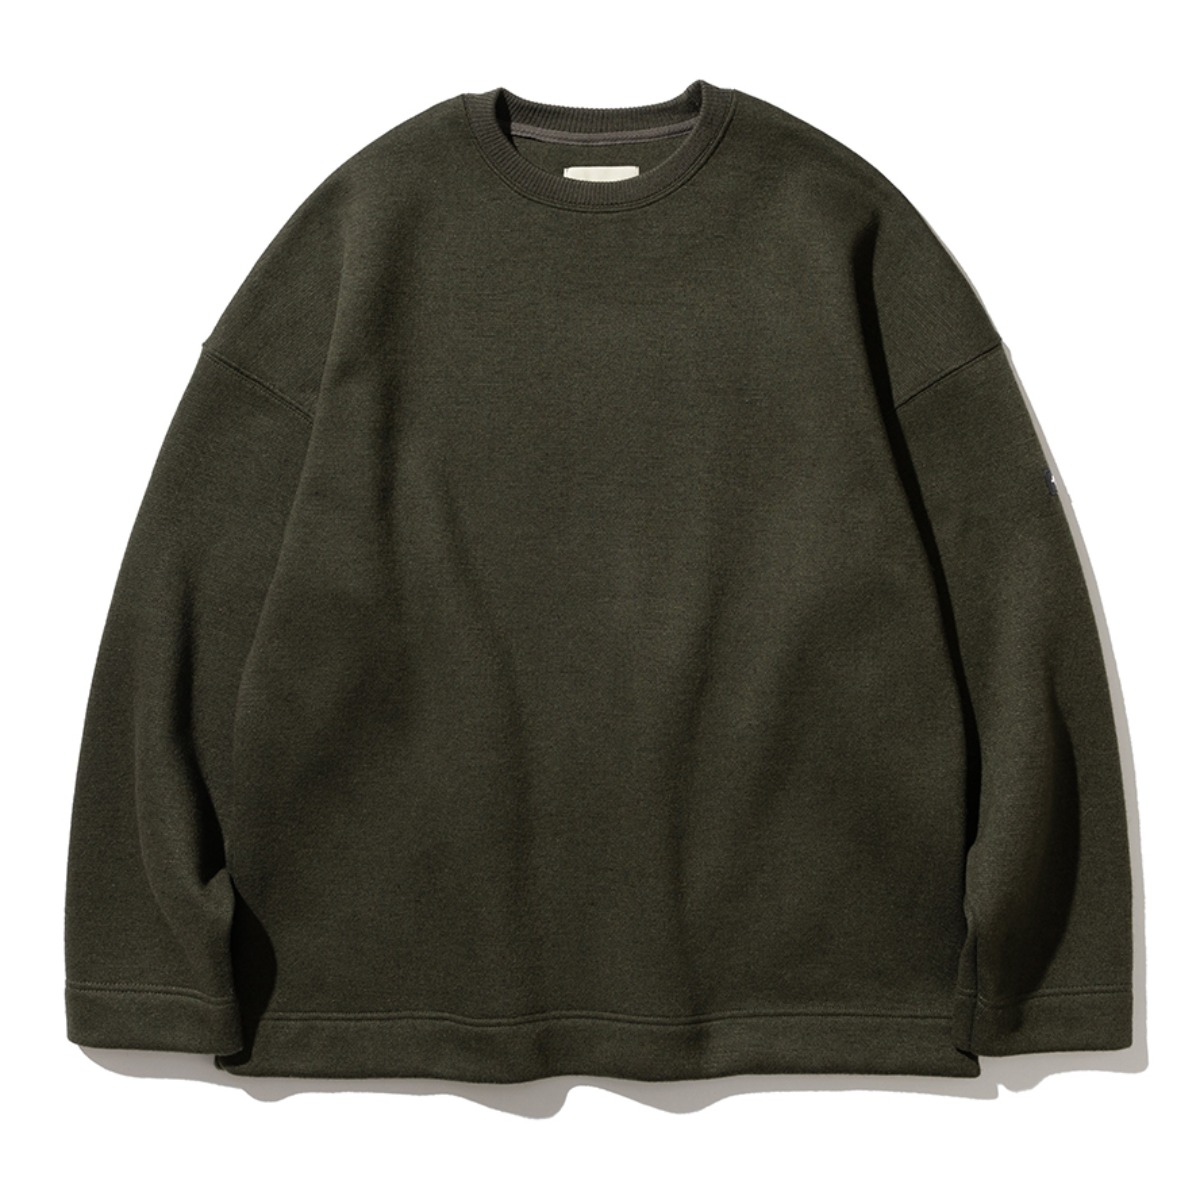 SDDL SIGNATURE PATCH DT OVER WOOL SWEAT SHIRT #3